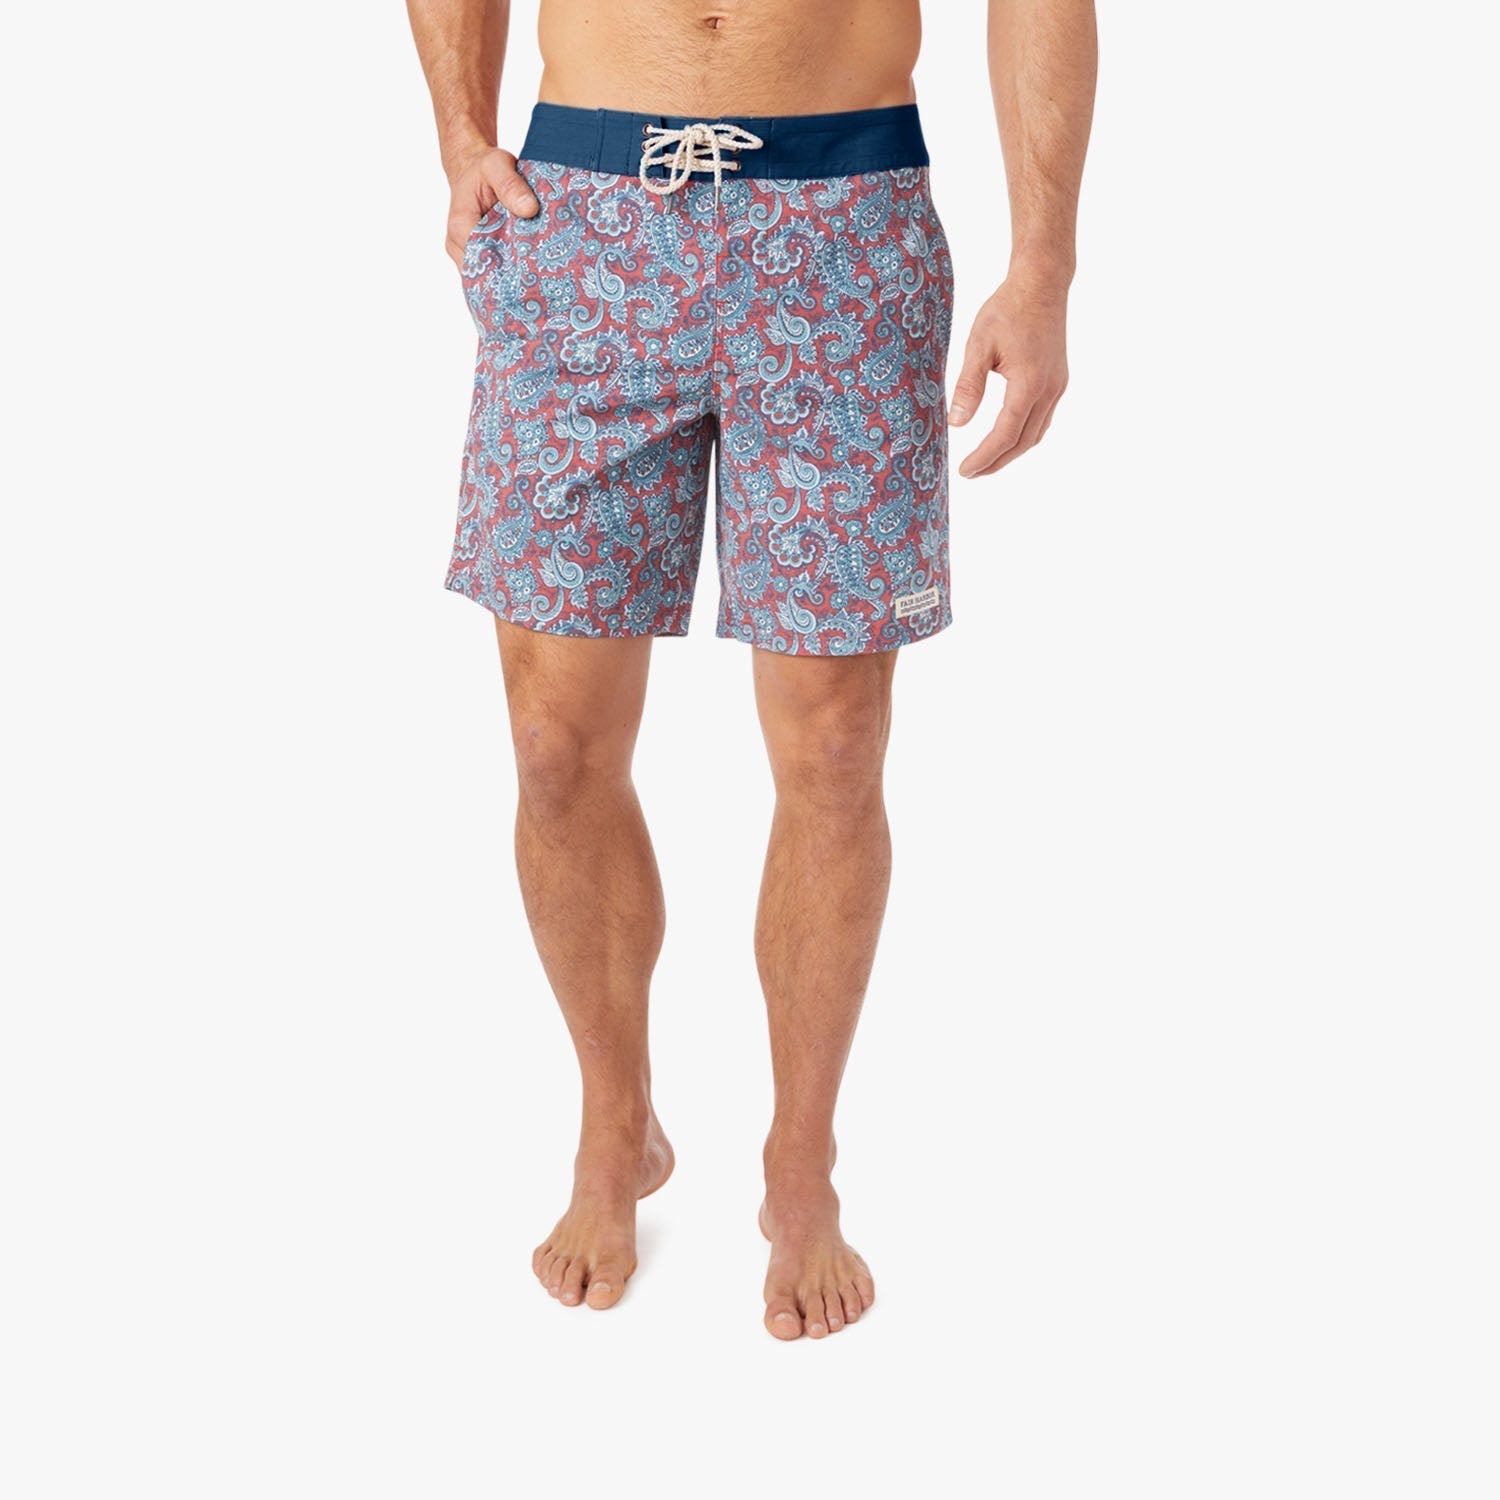 a-place-for-all-your-needs-to-buy-the-nautilus-boardshort-red-paisley-sale_2.jpg